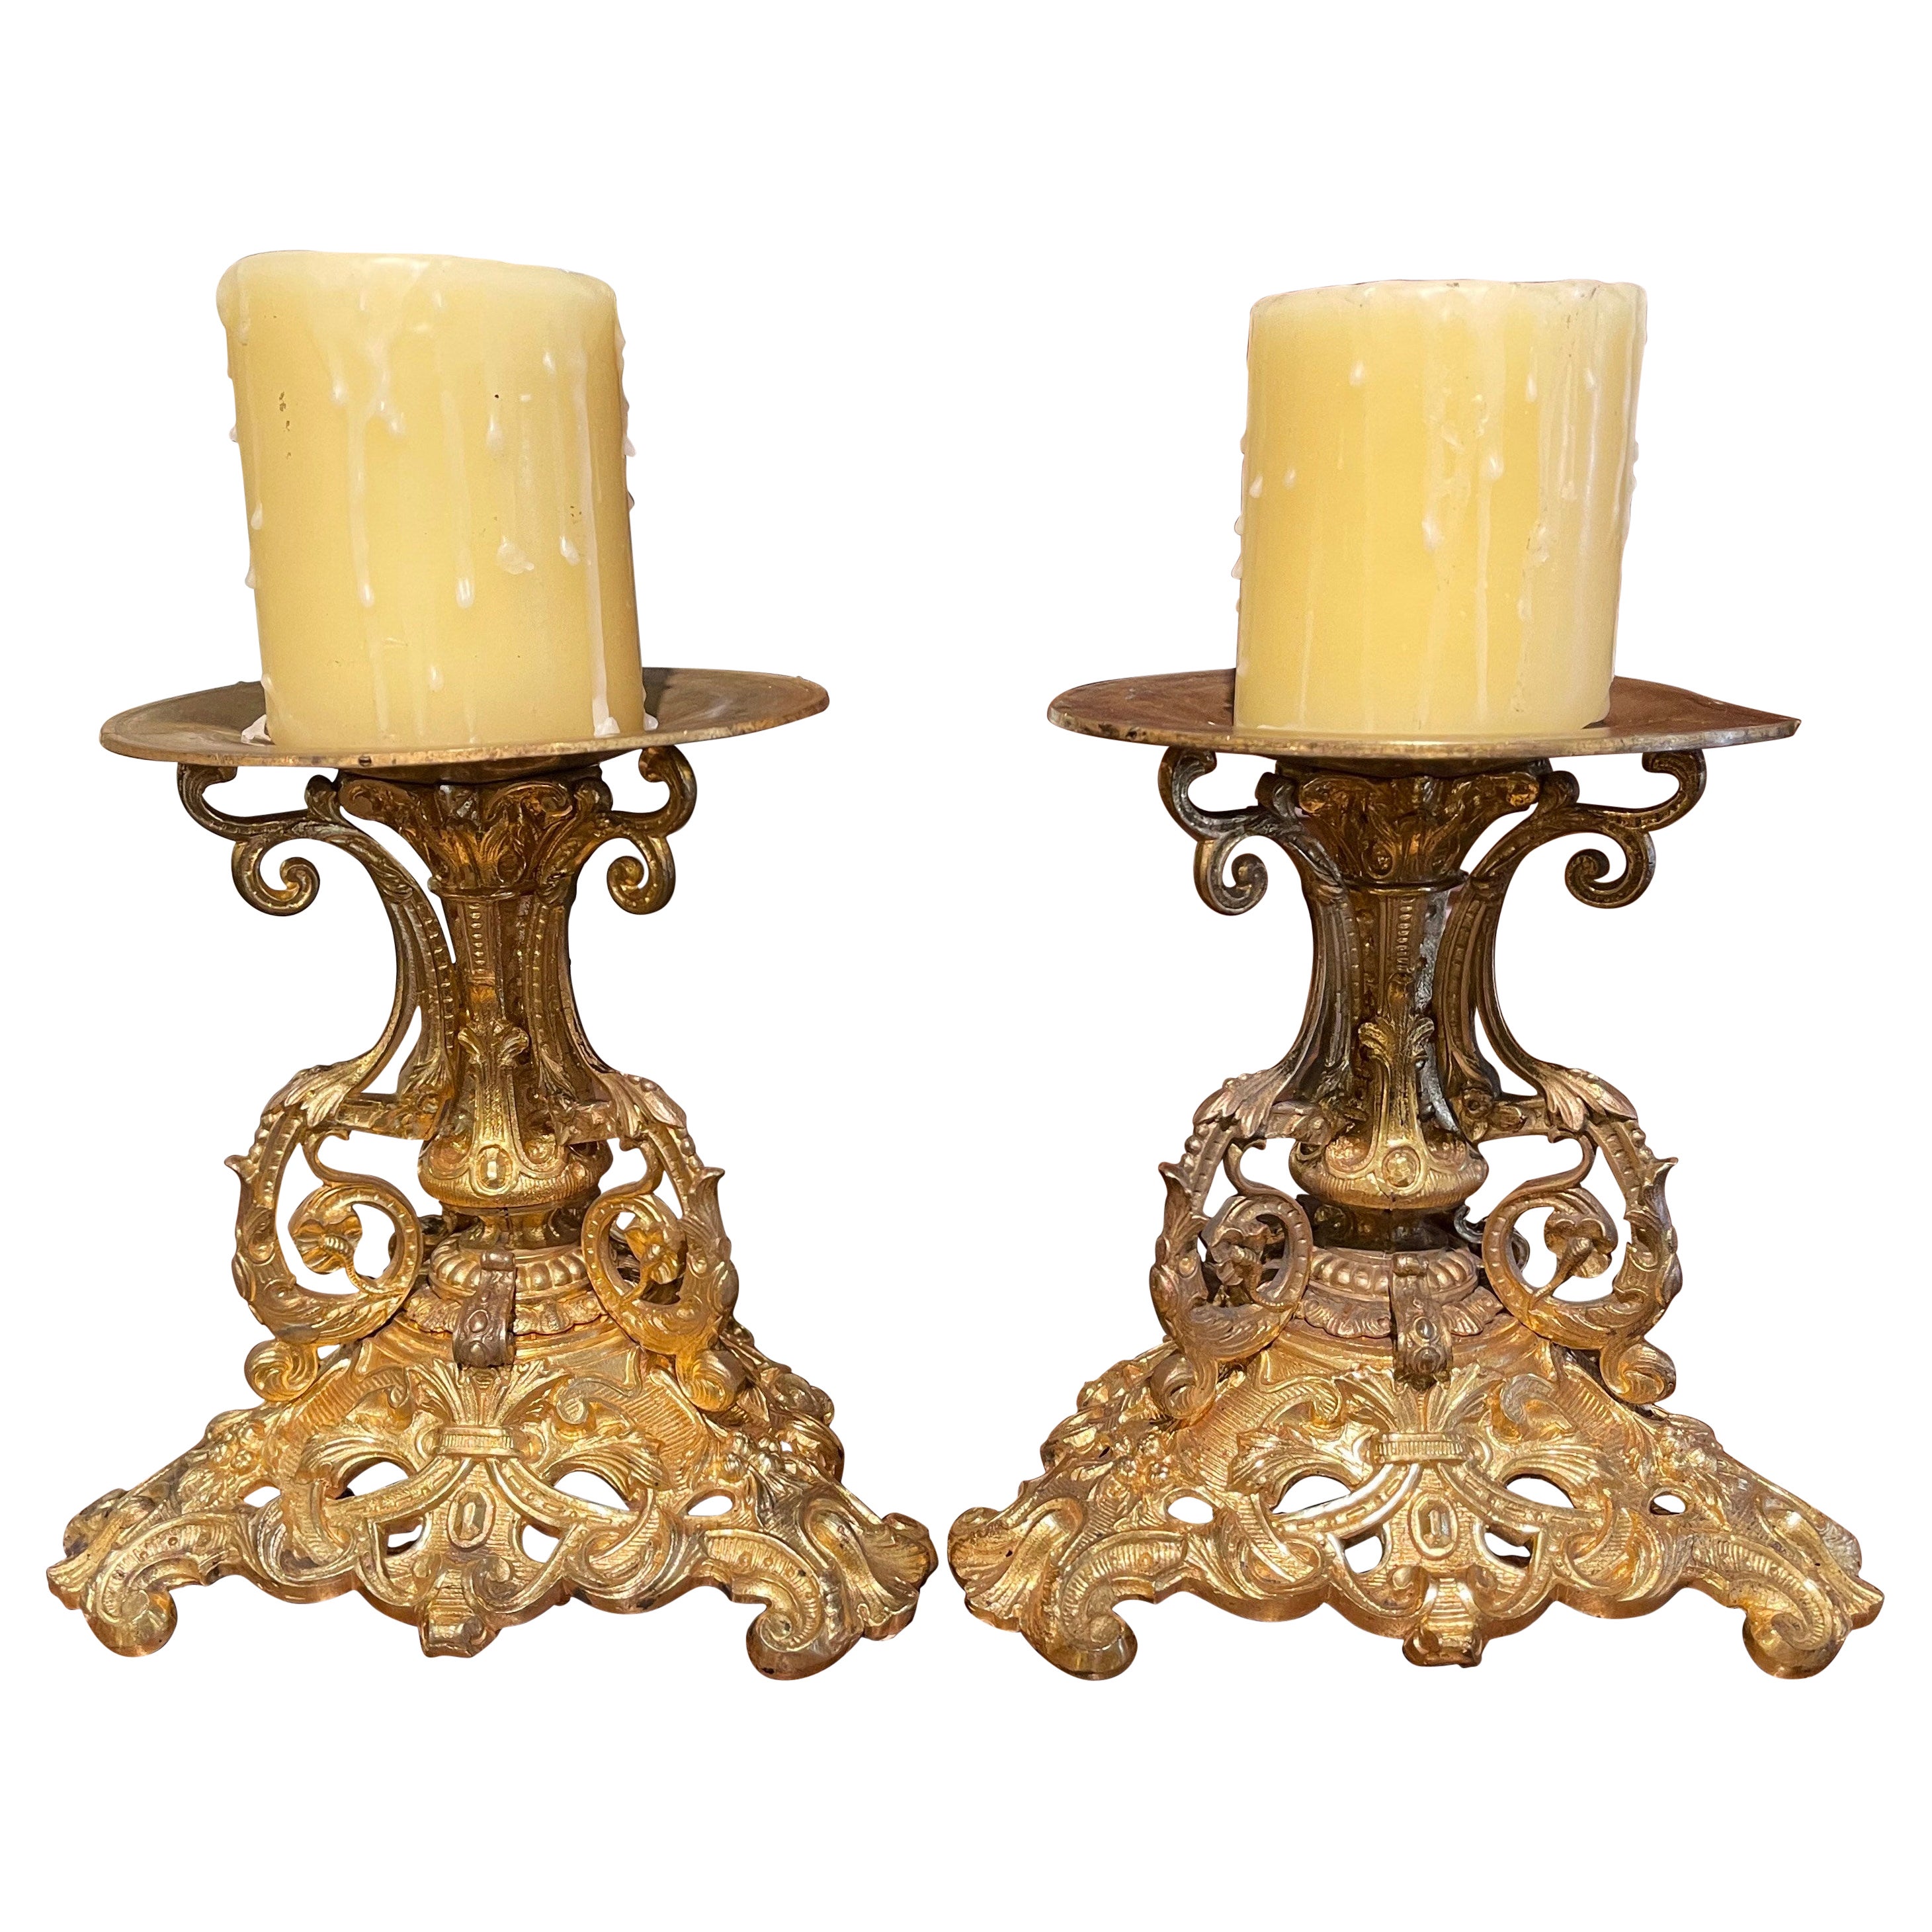 Pair of 19th Century French Louis XV Bronze Dore Candle Holders